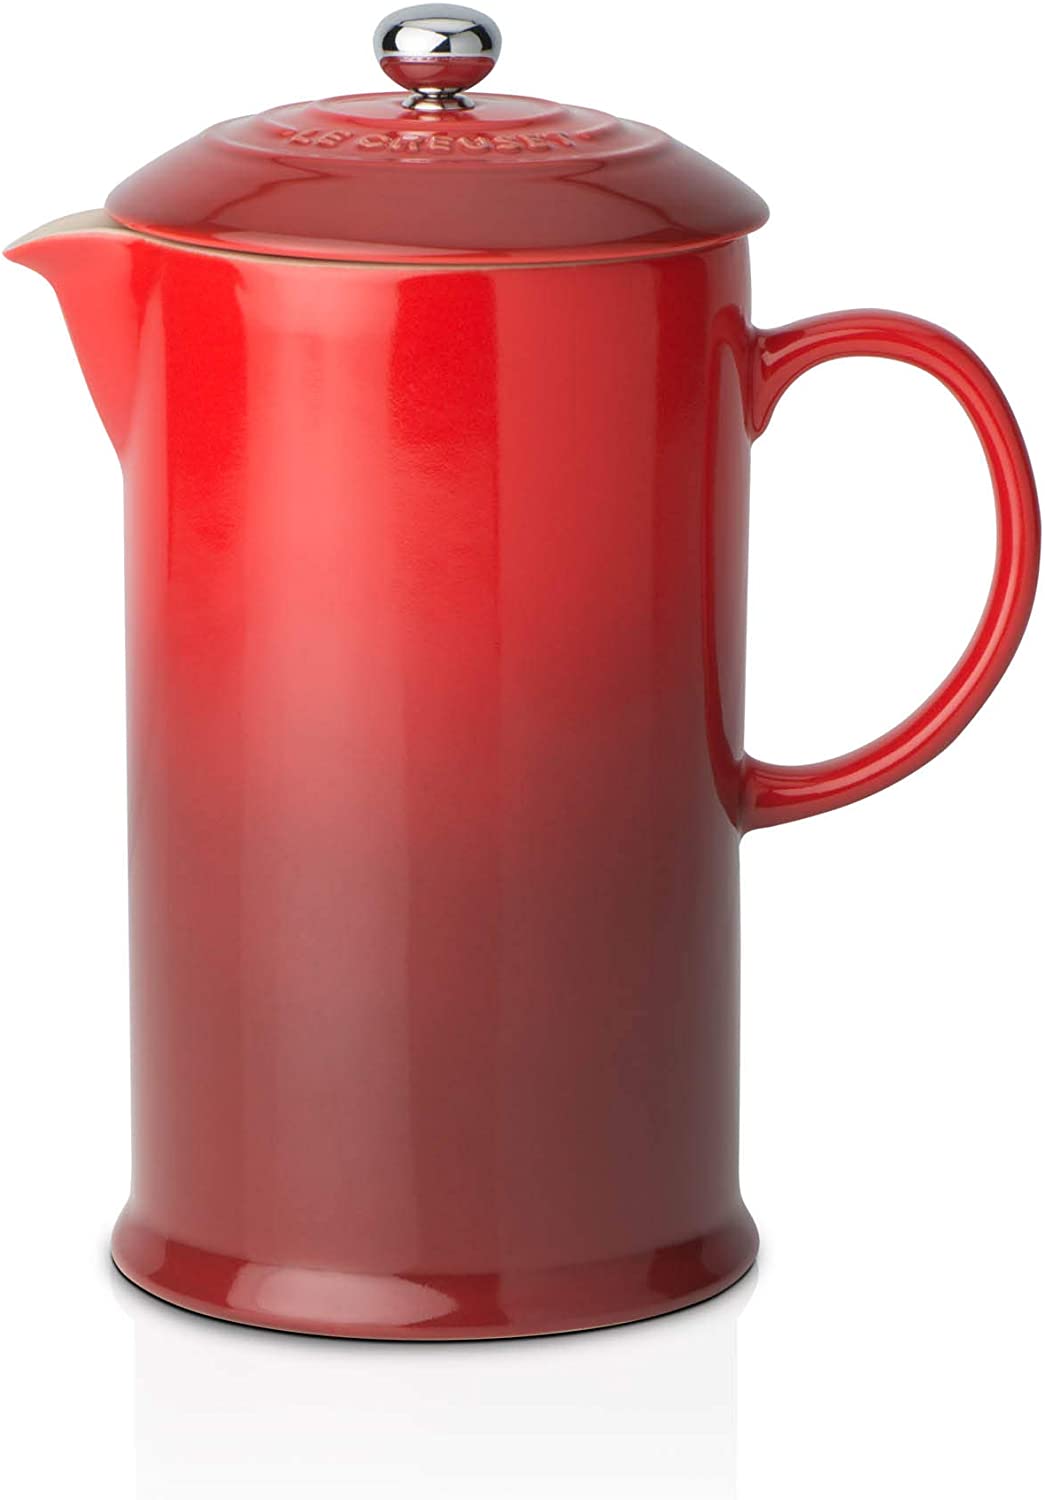 Le Creuset French Press Coffee Maker with Stainless Steel Press Insert 800 ml Stoneware, cherry red, 750 ml